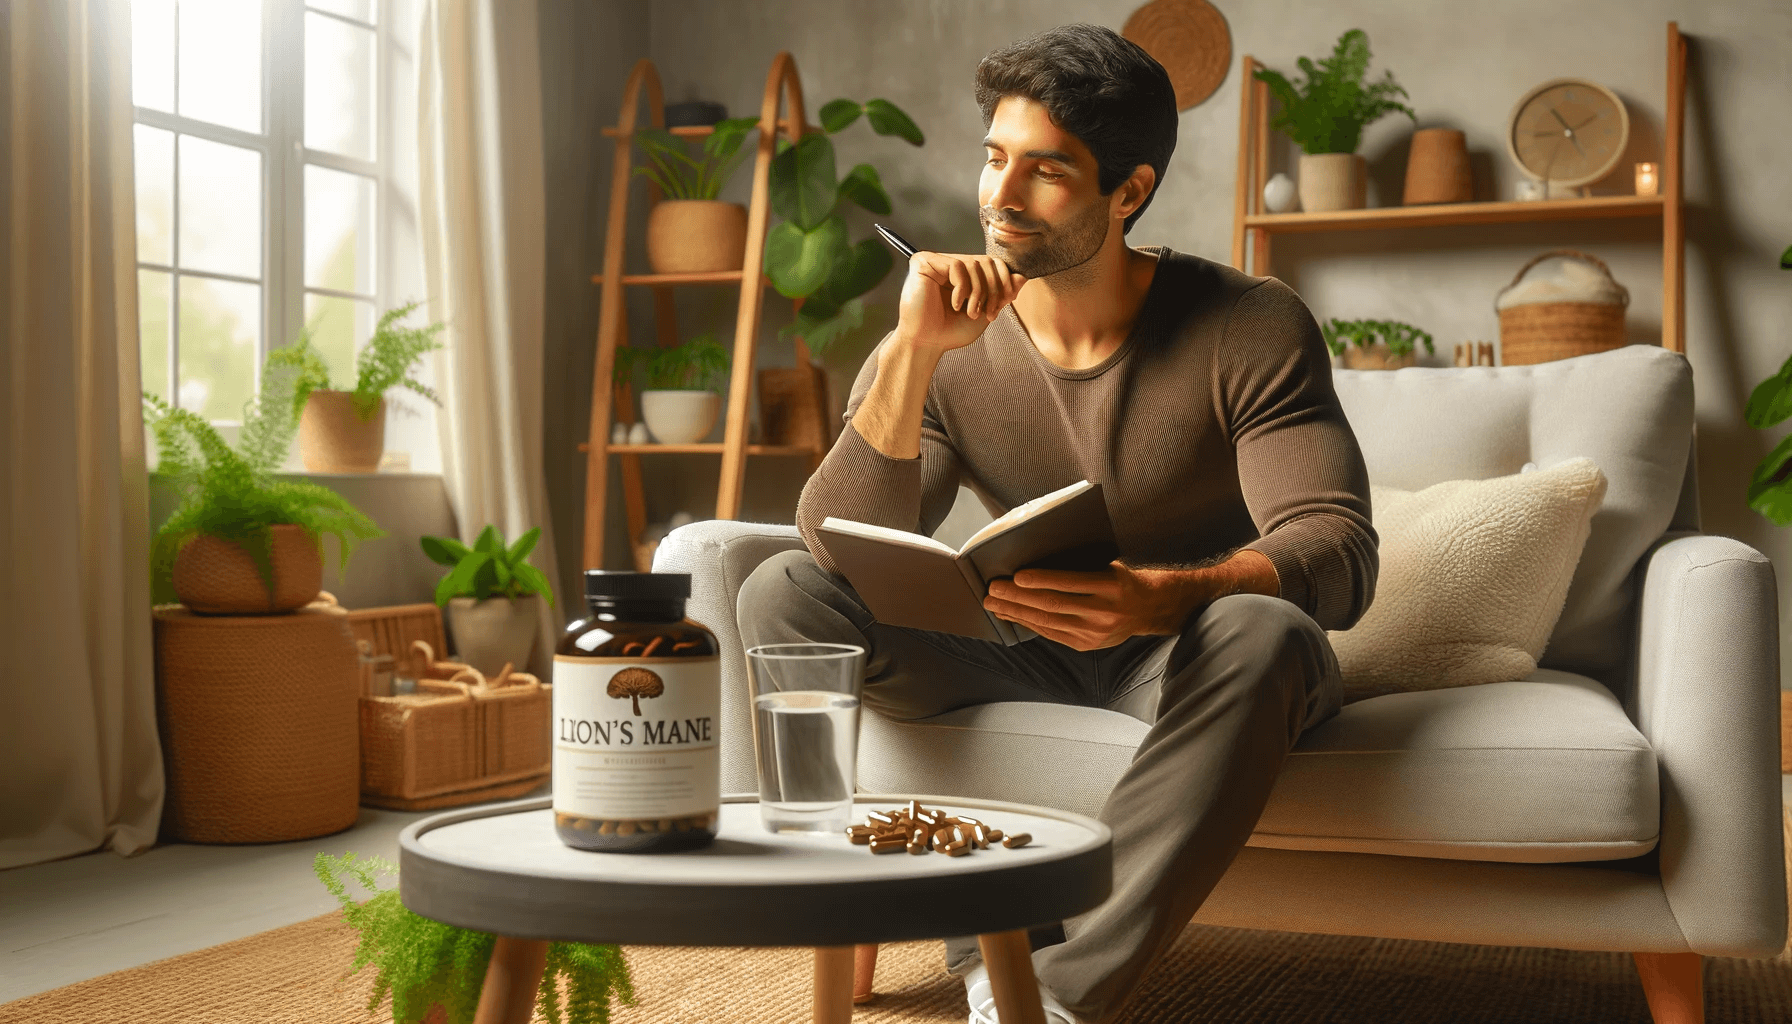 Satisfied individual reflecting on a holistic health journey with Lion's Mane mushroom supplements, embodying a commitment to natural cognitive wellness